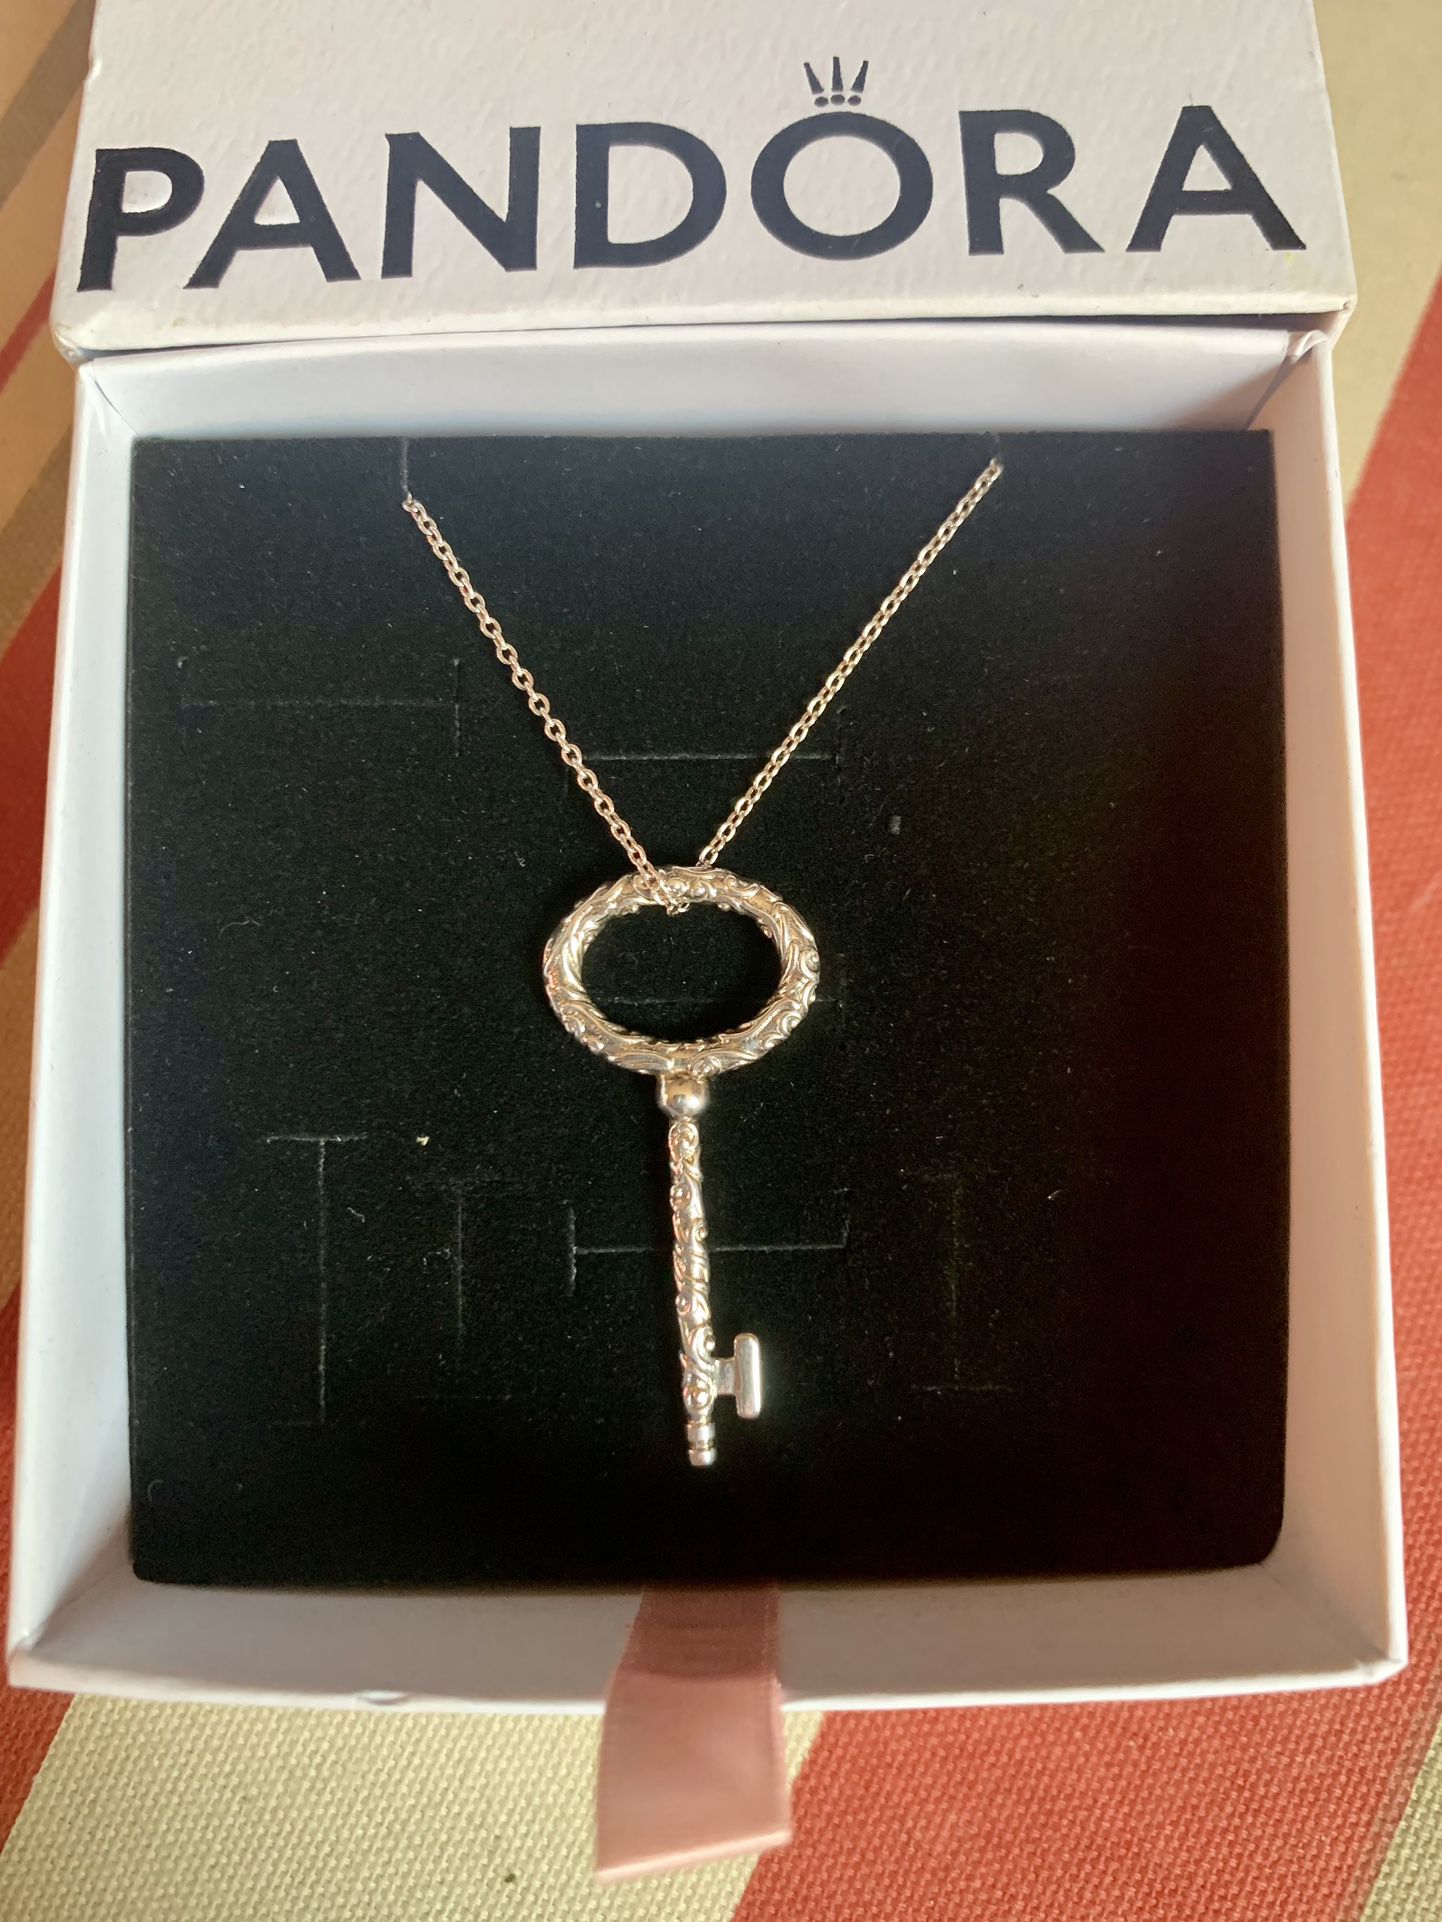 Pandora Regal Key Necklace for in High Point, NC - OfferUp